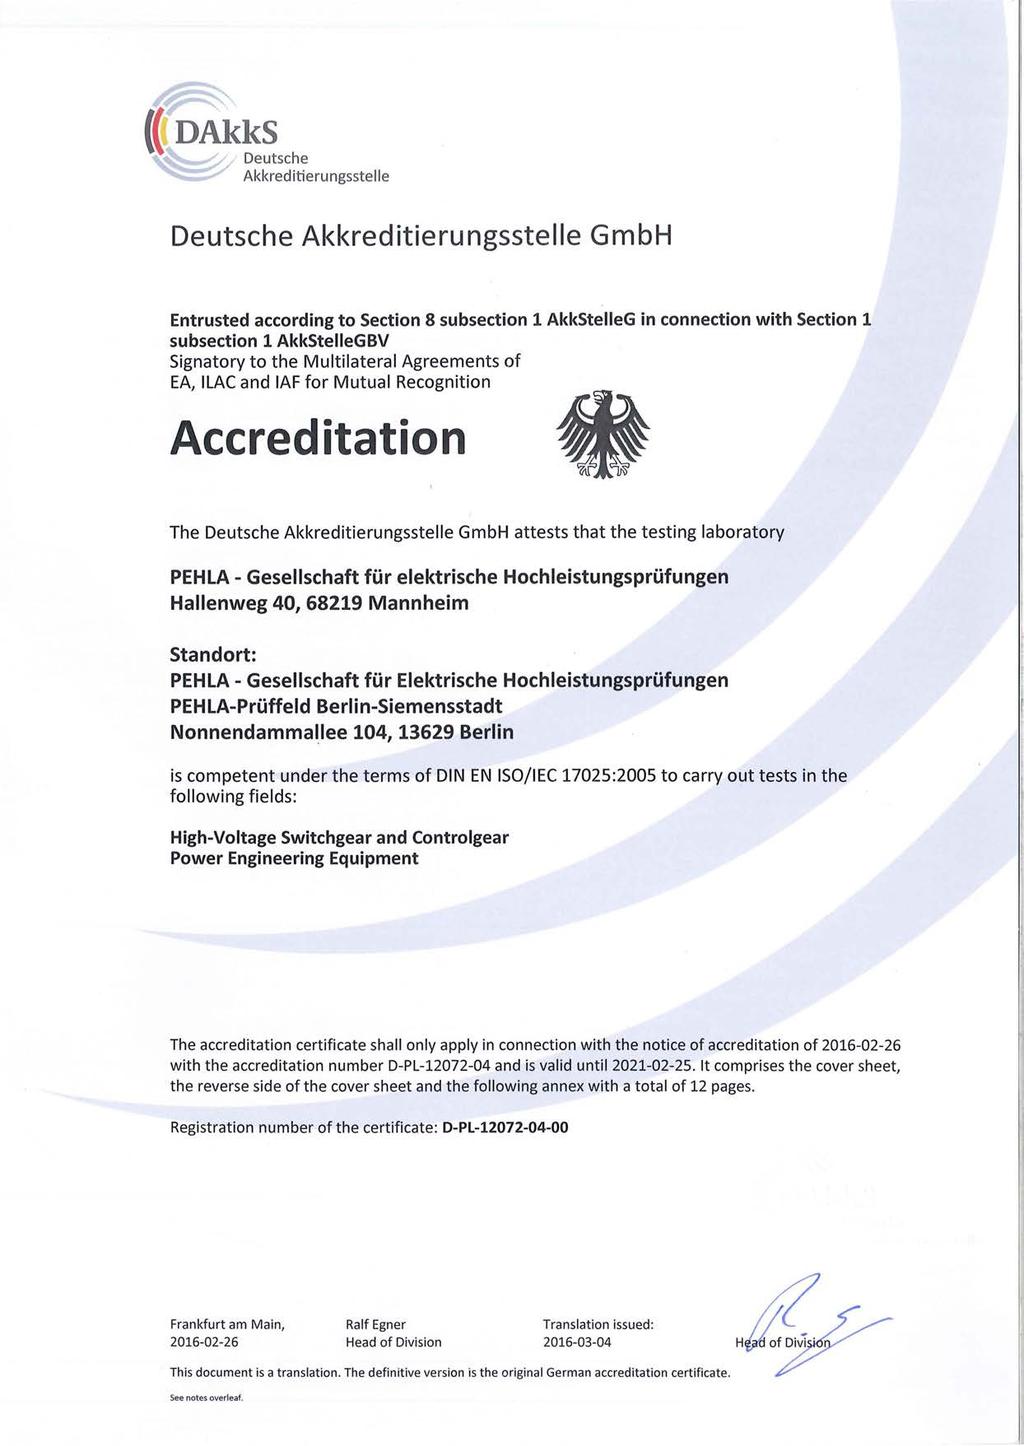 Deutsche GmbH Entrusted according to Section 8 subsection 1 AkkStelleG in connection with Section 1 subsection 1 AkkStelleGBV Signatory to the Multilateral Agreements of EA, ILAC and IAF for Mutual